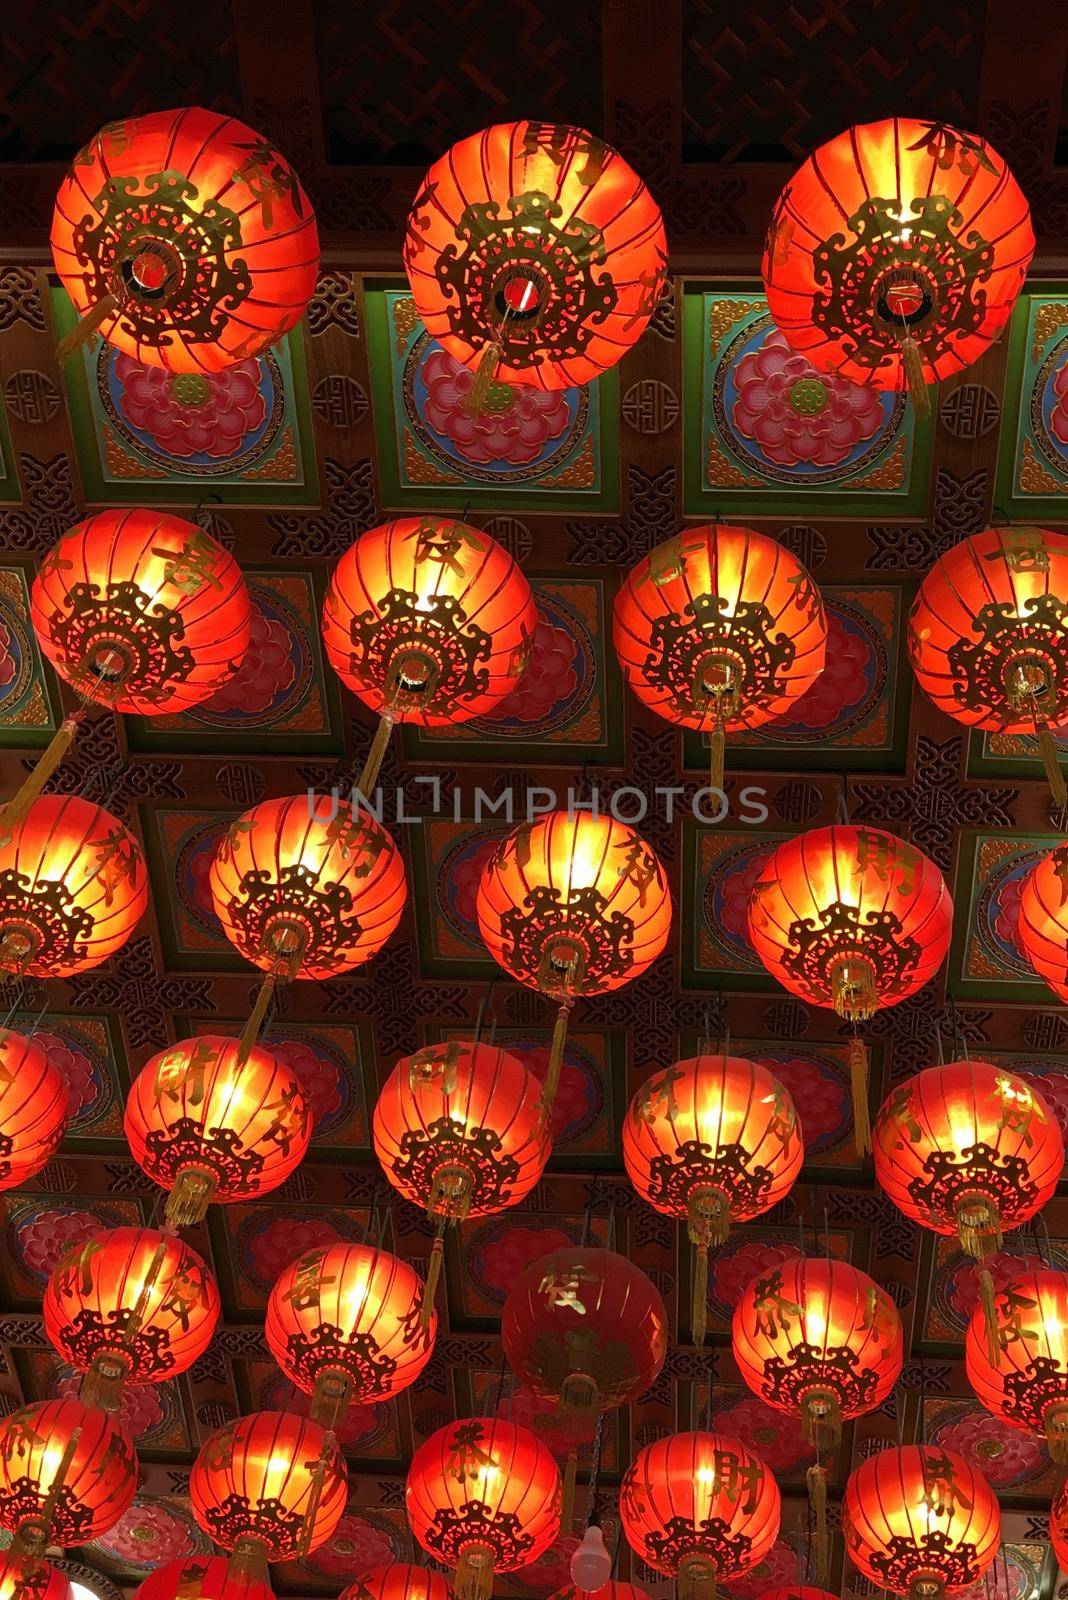 Chinese Red lanterns in china town preparation for the upcoming Chinese New Year